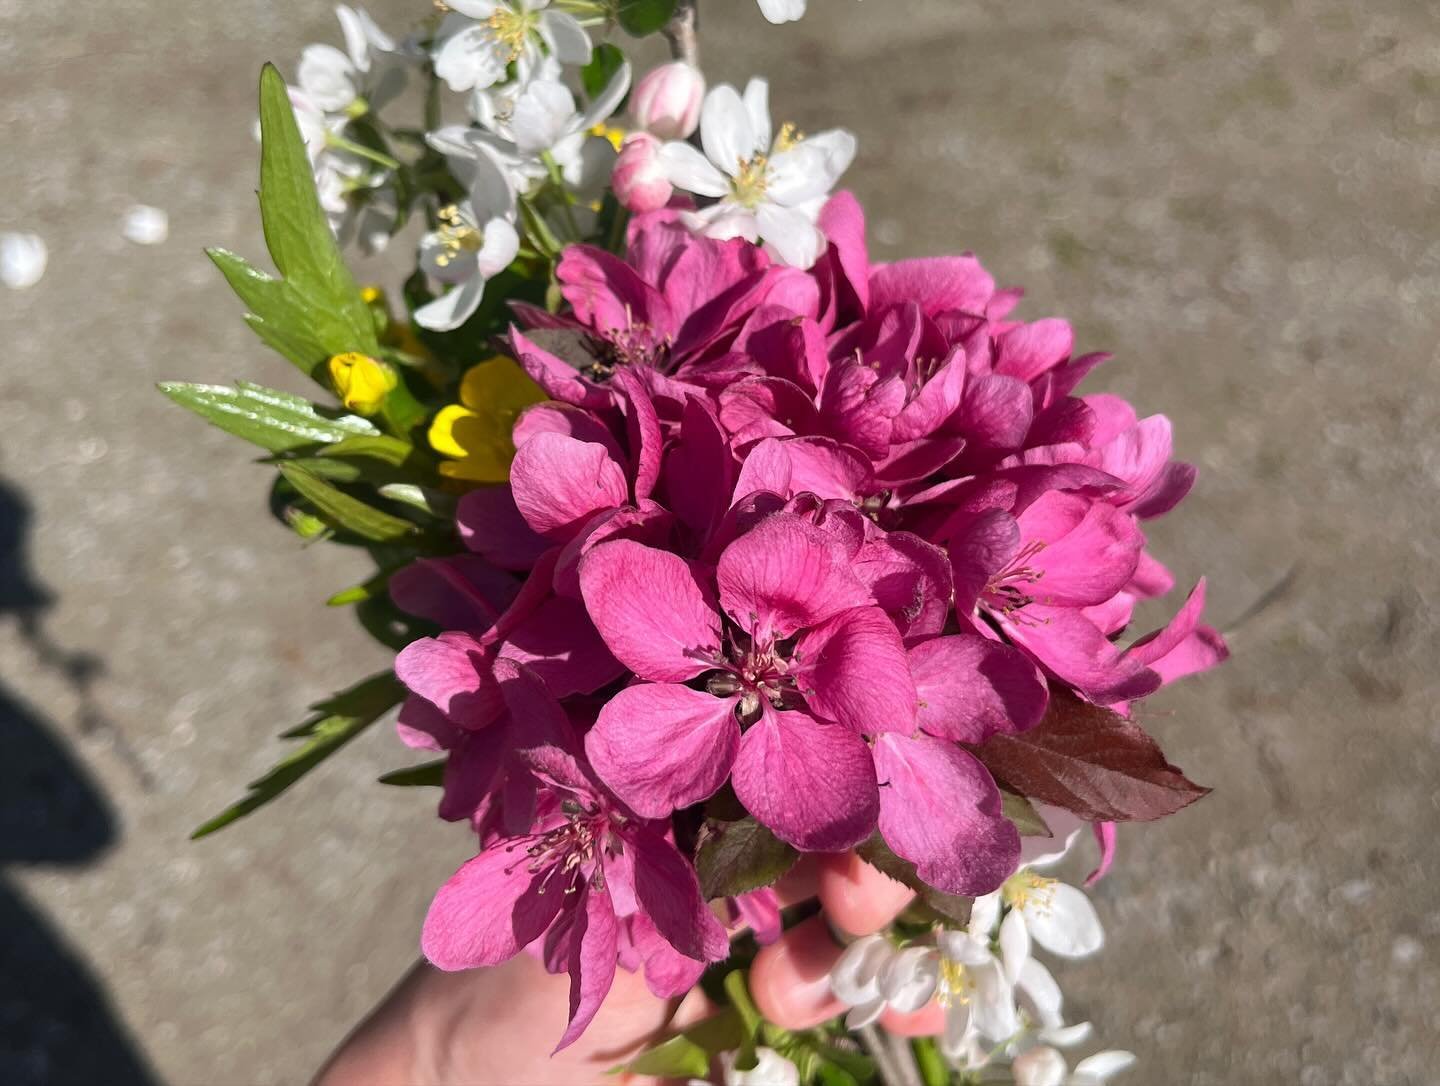 The process of a flower press workshop:
1. I walk around my neighbourhood and forage flowers from agreeable neighbours.
2. I hike 1-2 trails inside the city to grab a few more wildflowers. 
3. I speak to other folks on the trails about what I&rsquo;m